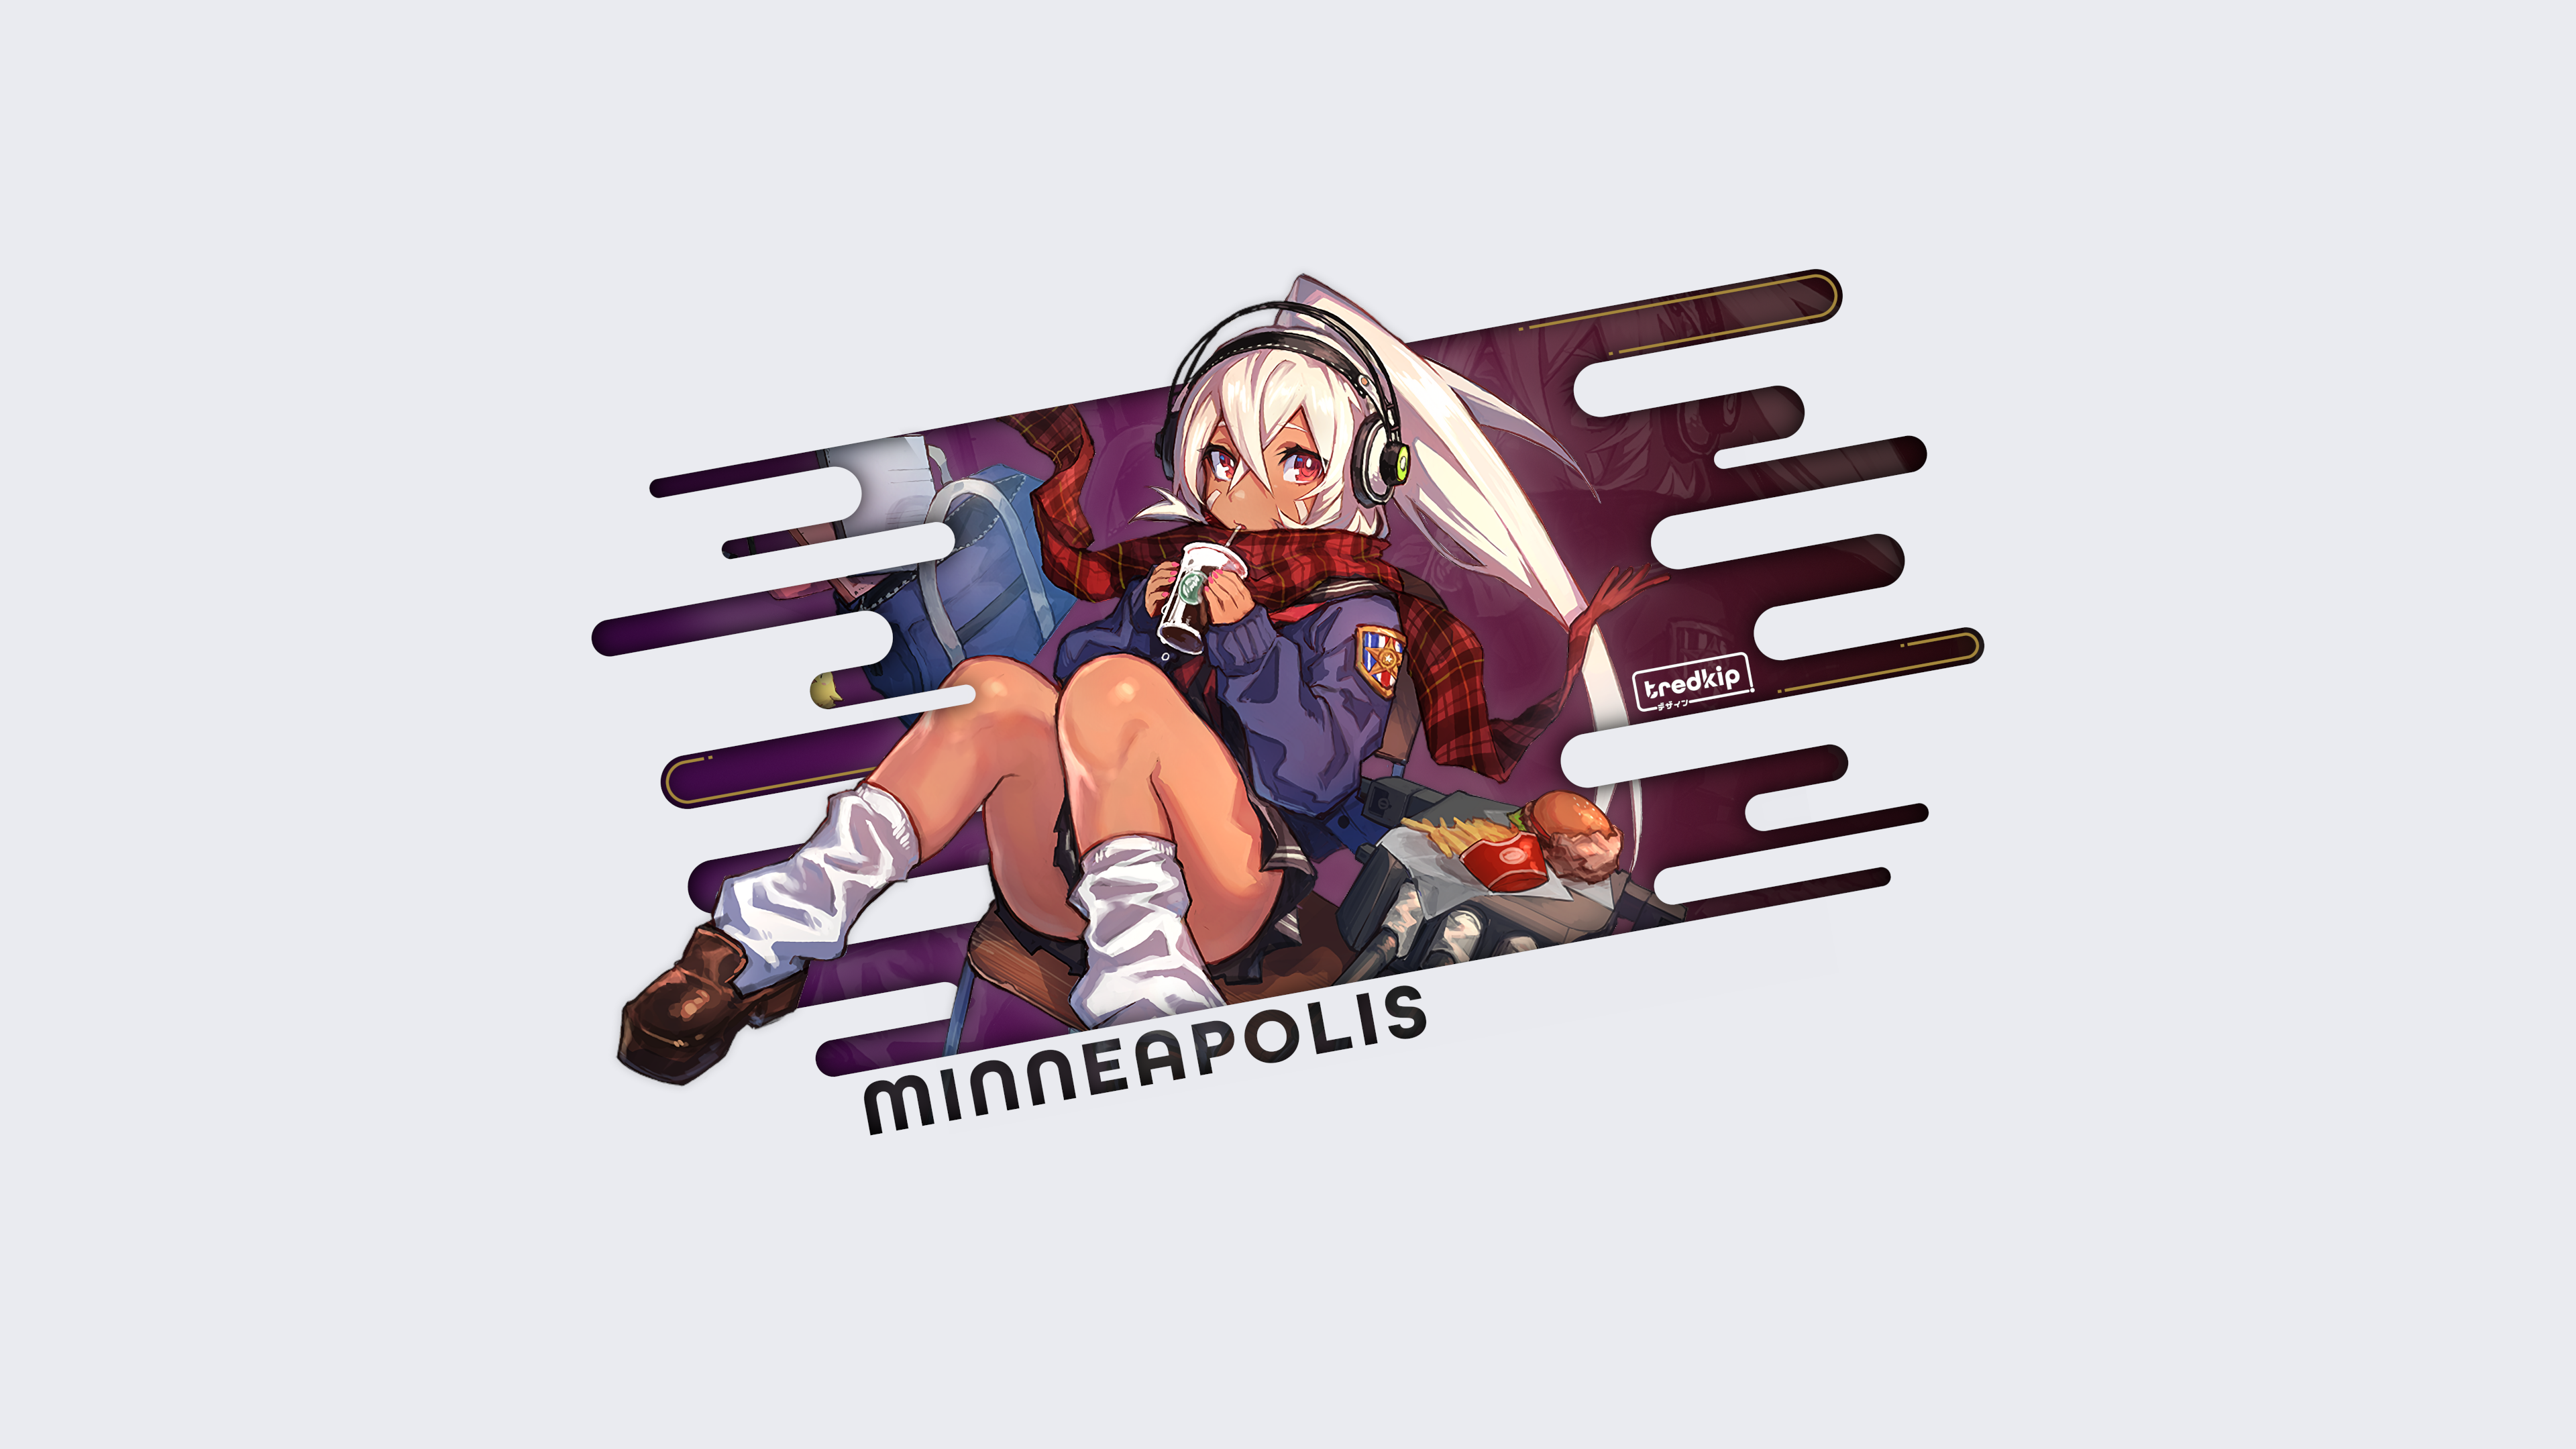 Azur Lane Minneapolis Azur Lane Render In Shapes Material Minimal Picture In Picture Anime Girls 3840x2160